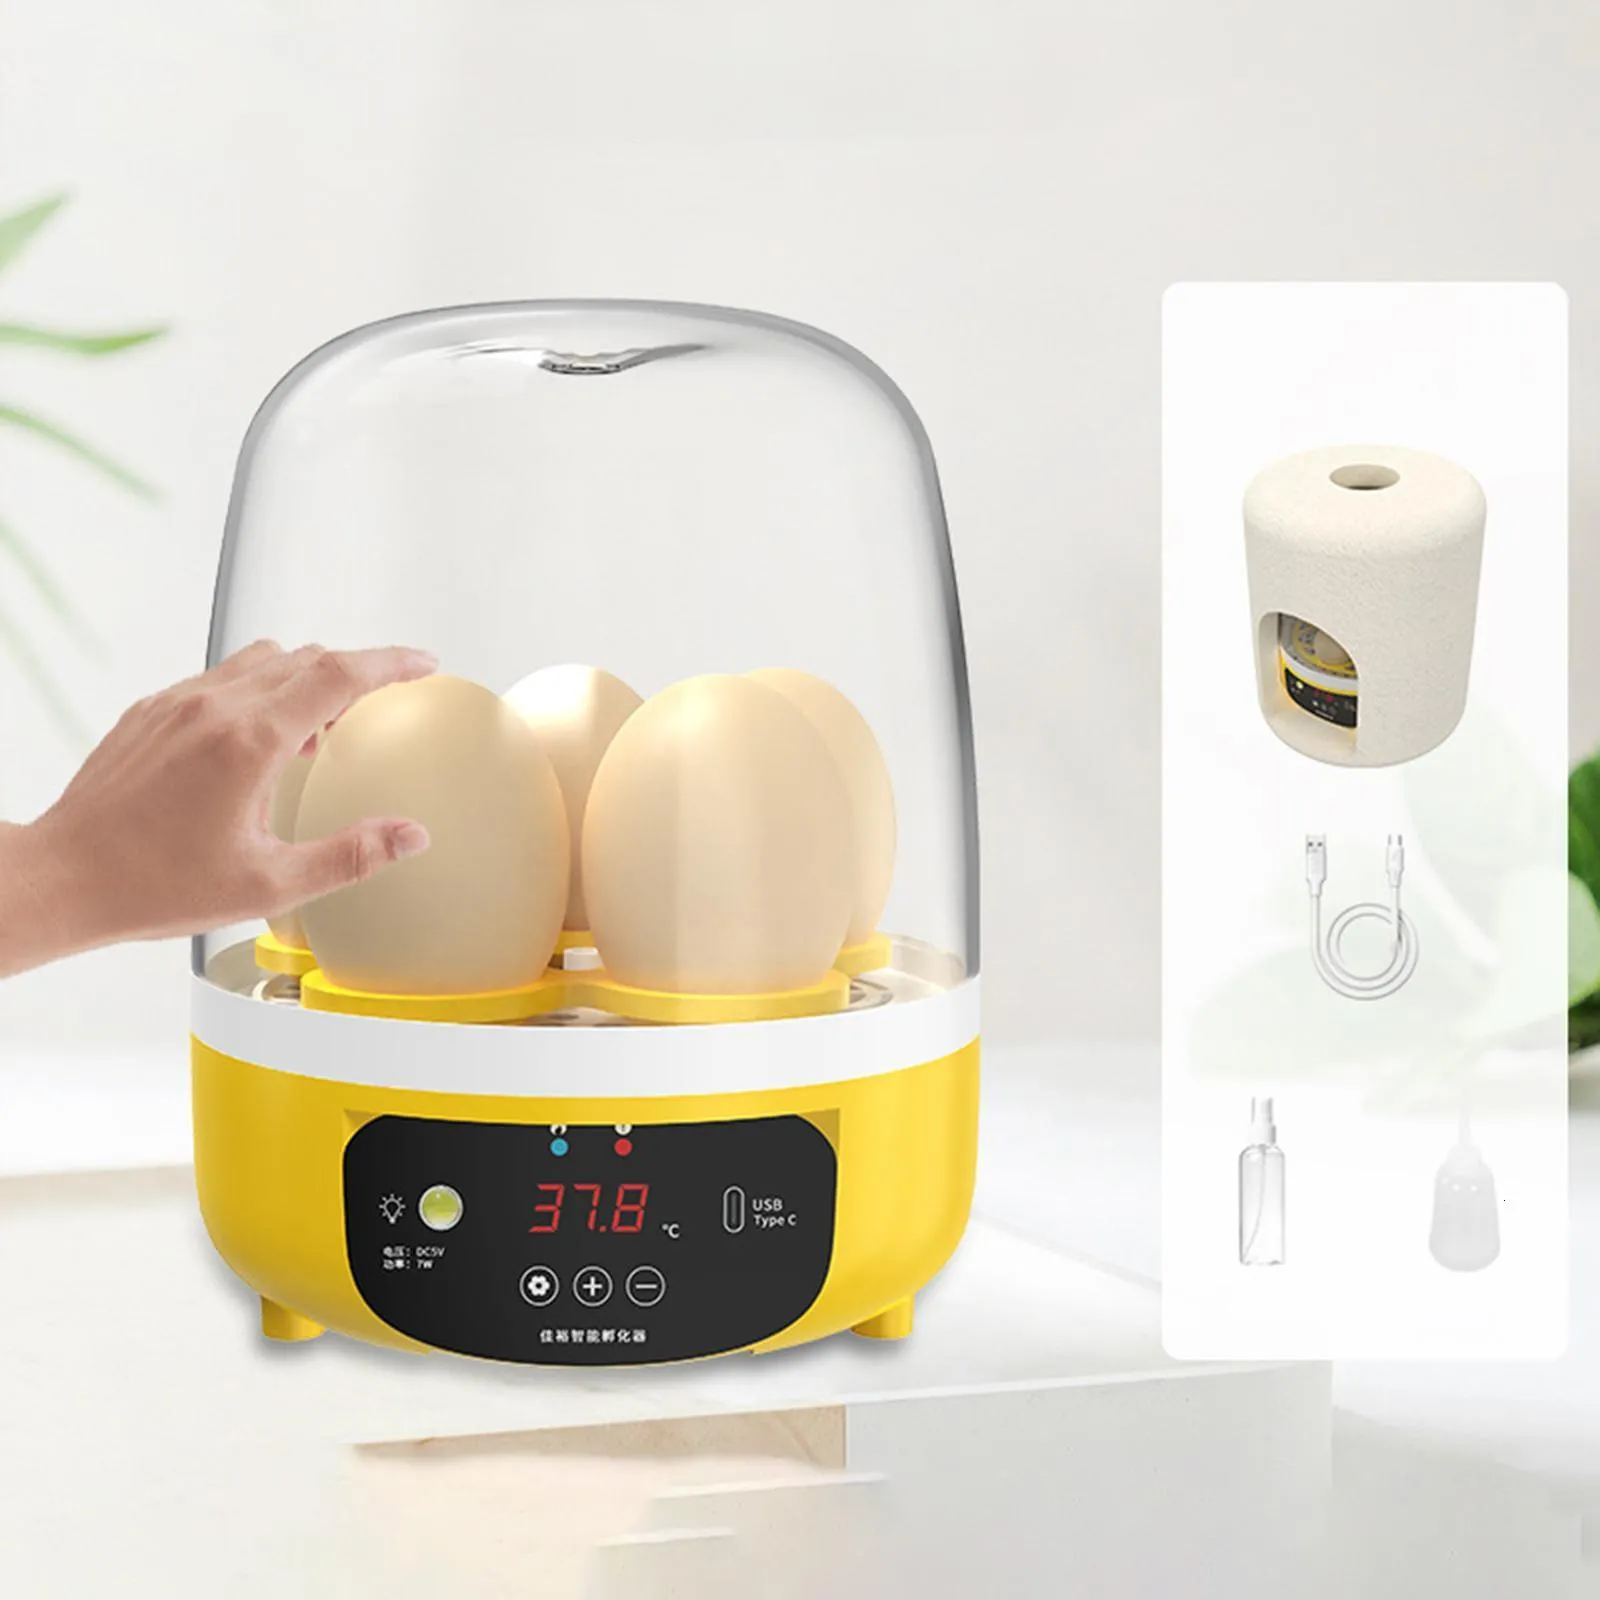 Mini Digital Automatic Egg Incubator 5 Eggs Auto Turner Temperature Control Poultry Hatcher Machine for Hatching Chicken Goose